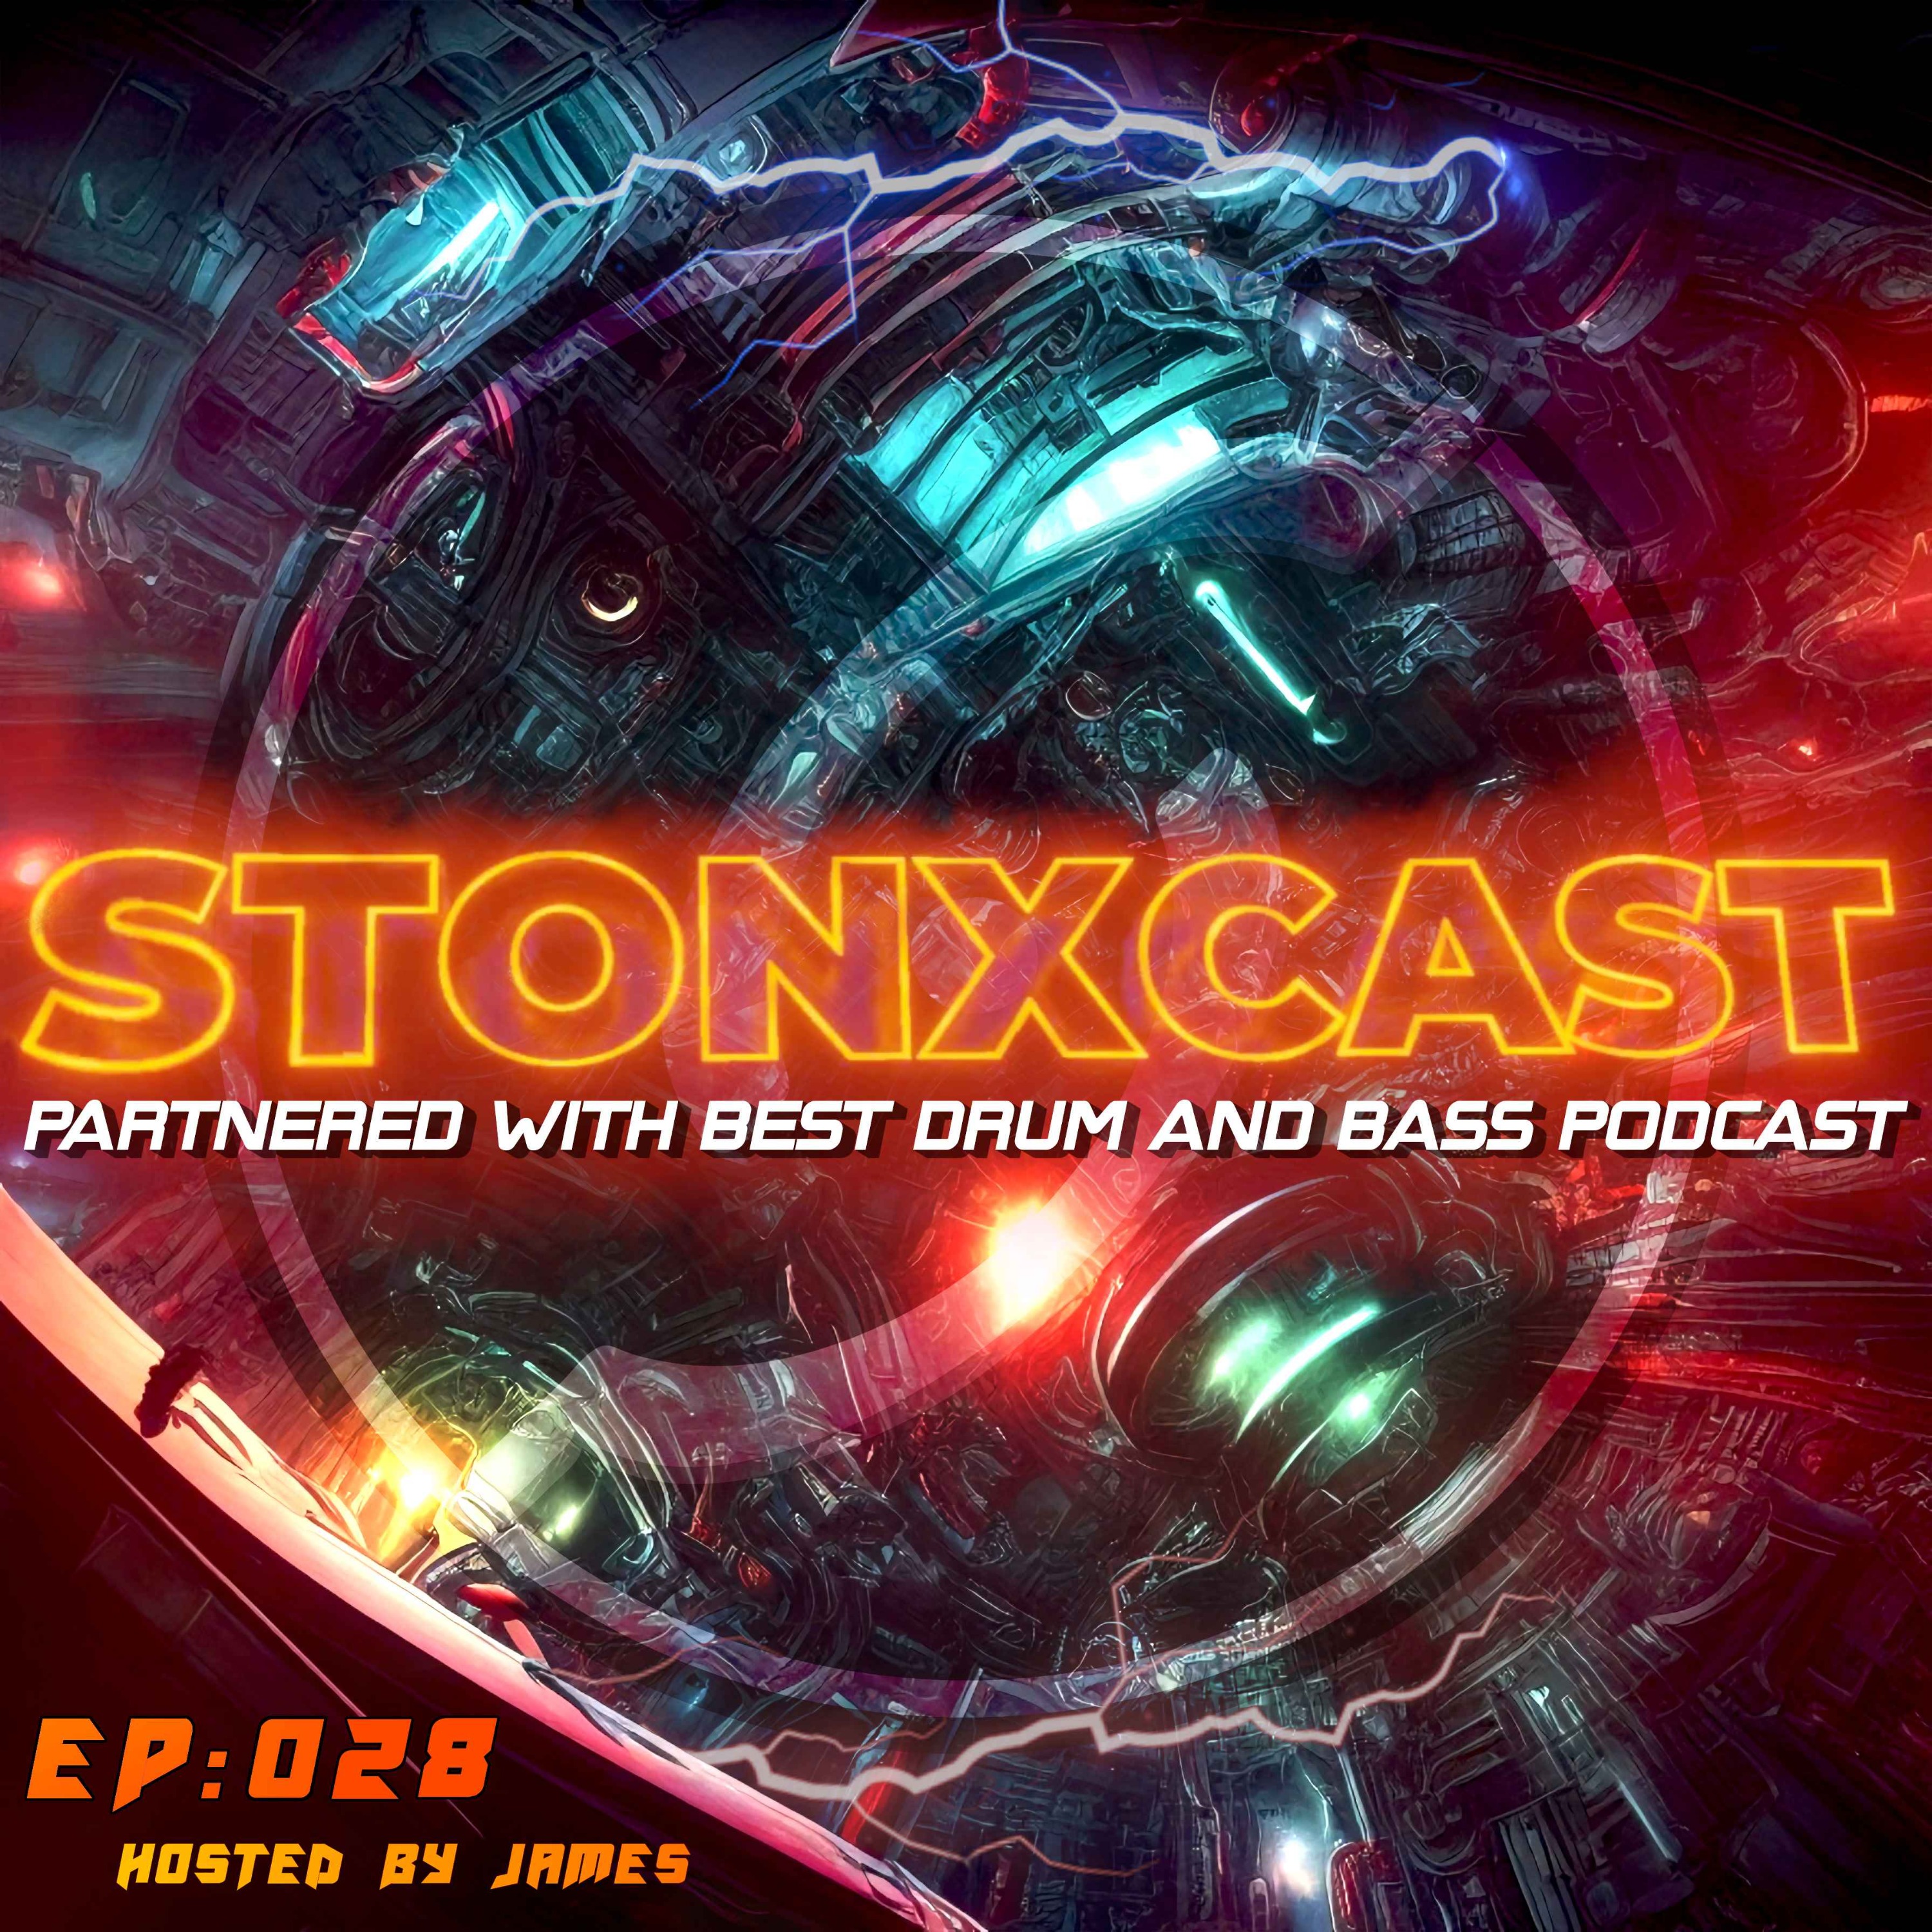  Stonxcast EP:028 - Hosted by James Artwork